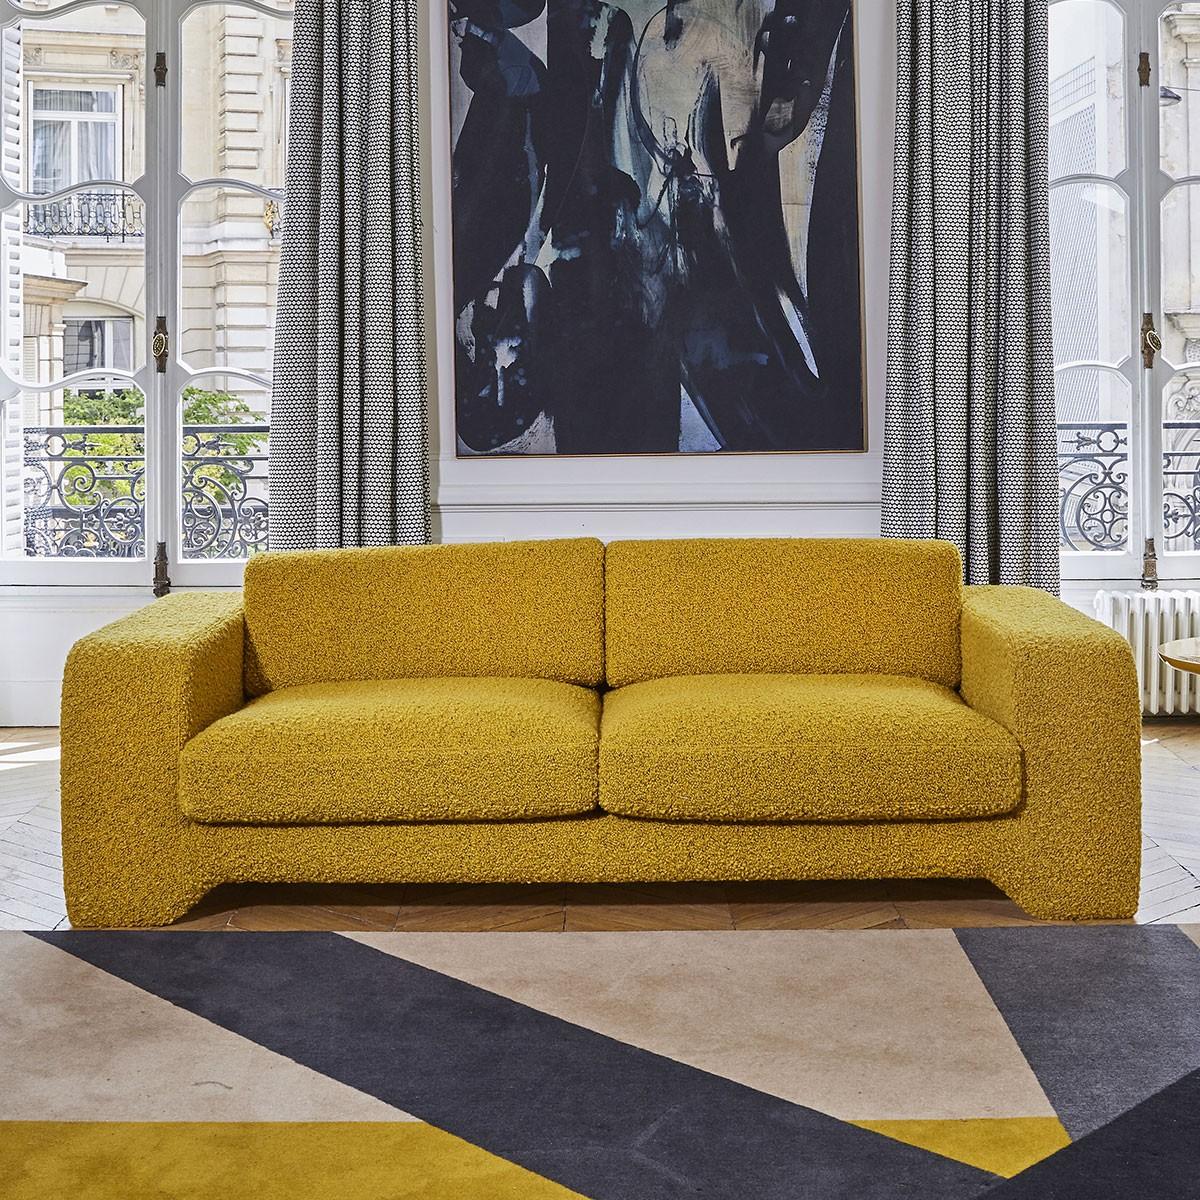 Popus Editions Giovanna 2.5 seater sofa in green (771727) Como velvet upholstery.

Giovanna is a sofa with a strong profile. A sober, plush line, with this famous detail that changes everything, so as not to forget its strength of character and